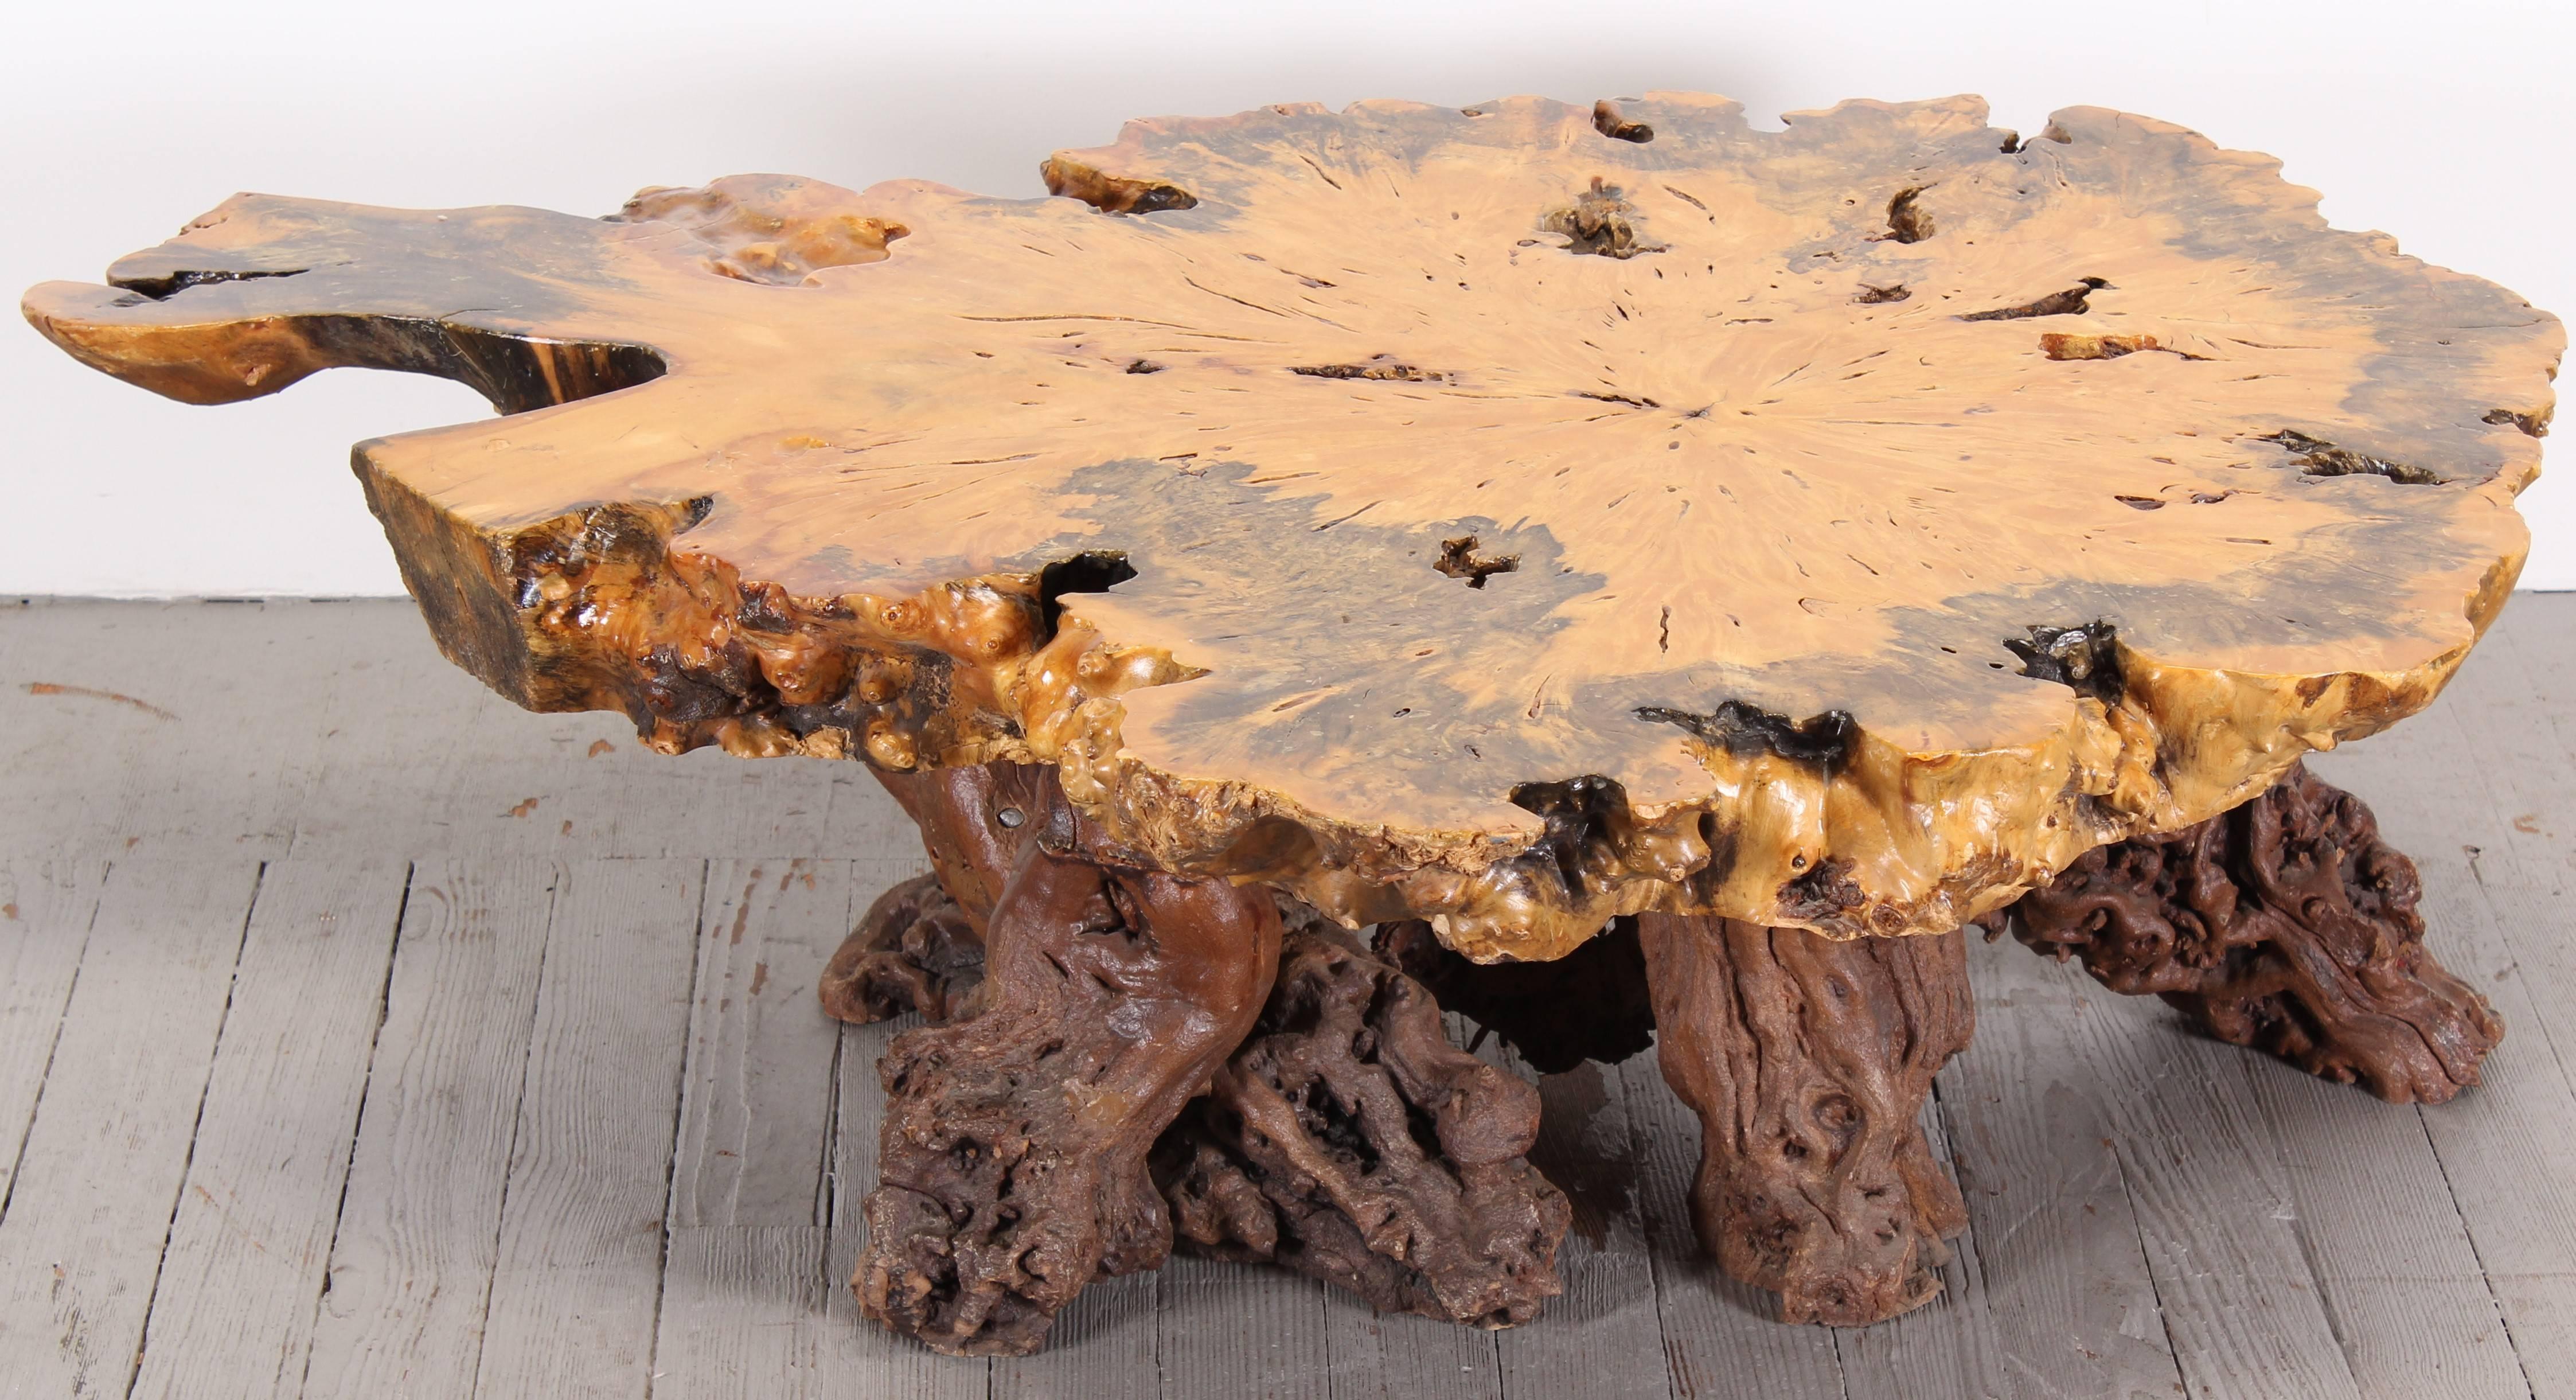 Maple burl wood slab top coffee table with old growth grape vine base. Table is sturdy and functional. A great organic, modern accent piece.